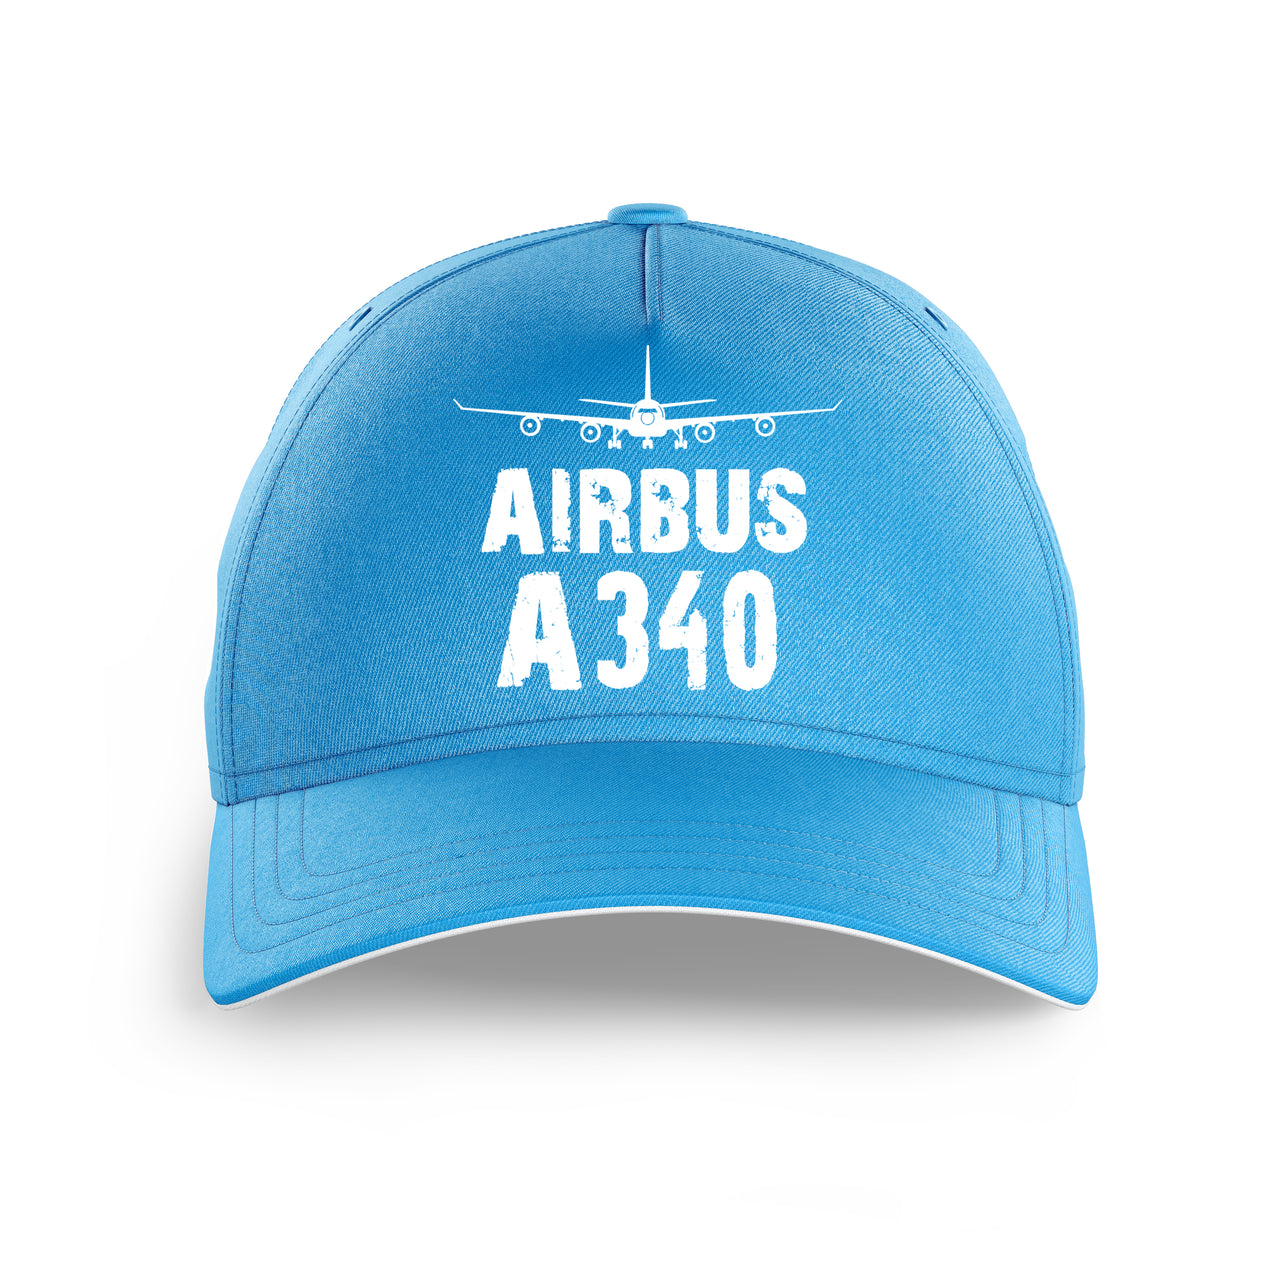 Airbus A340 & Plane Printed Hats